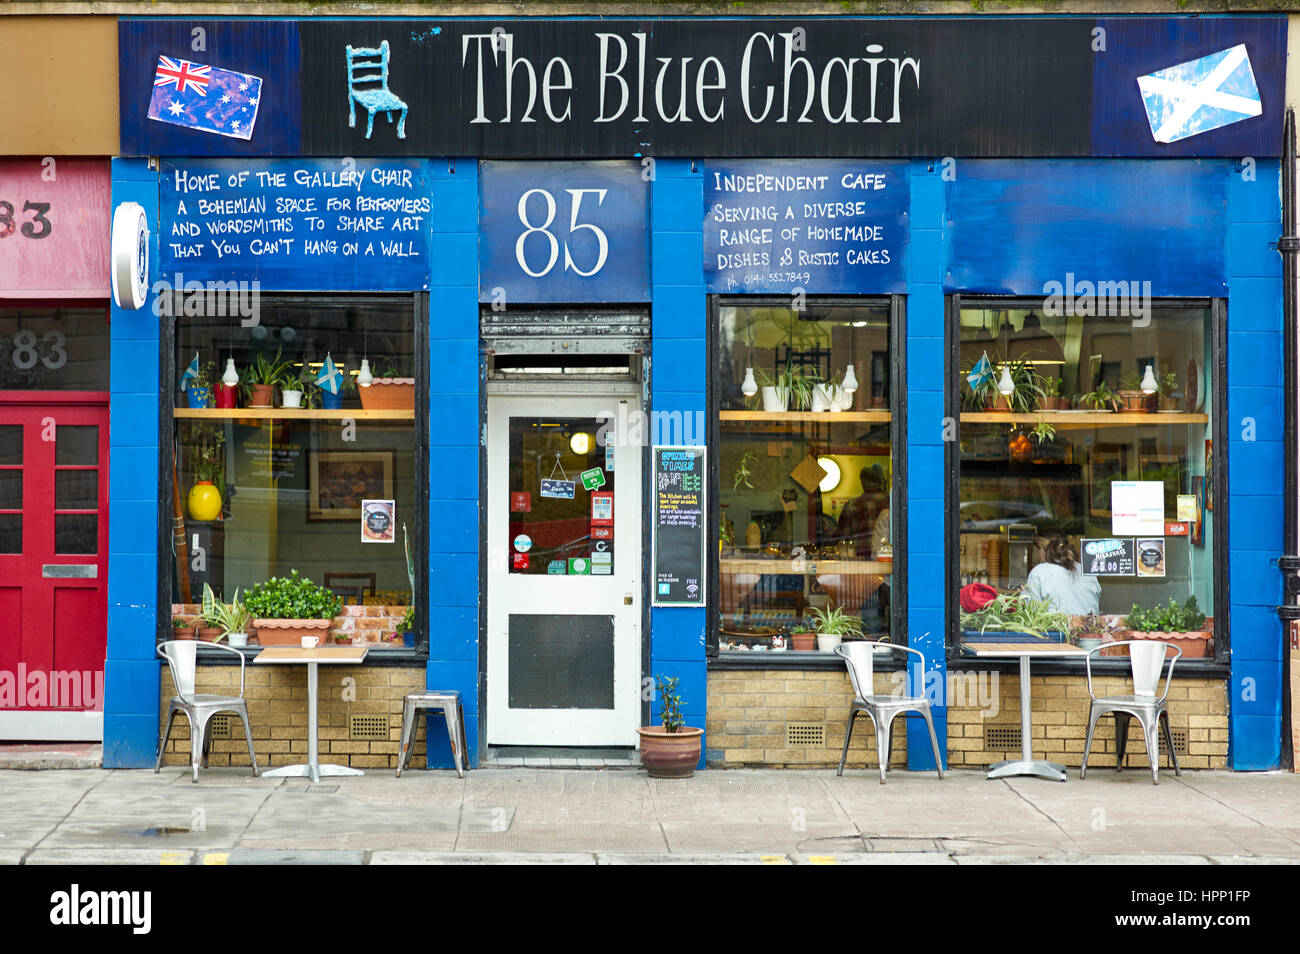 The Blue Chair, independent cafe in Glasgow Stock Photo